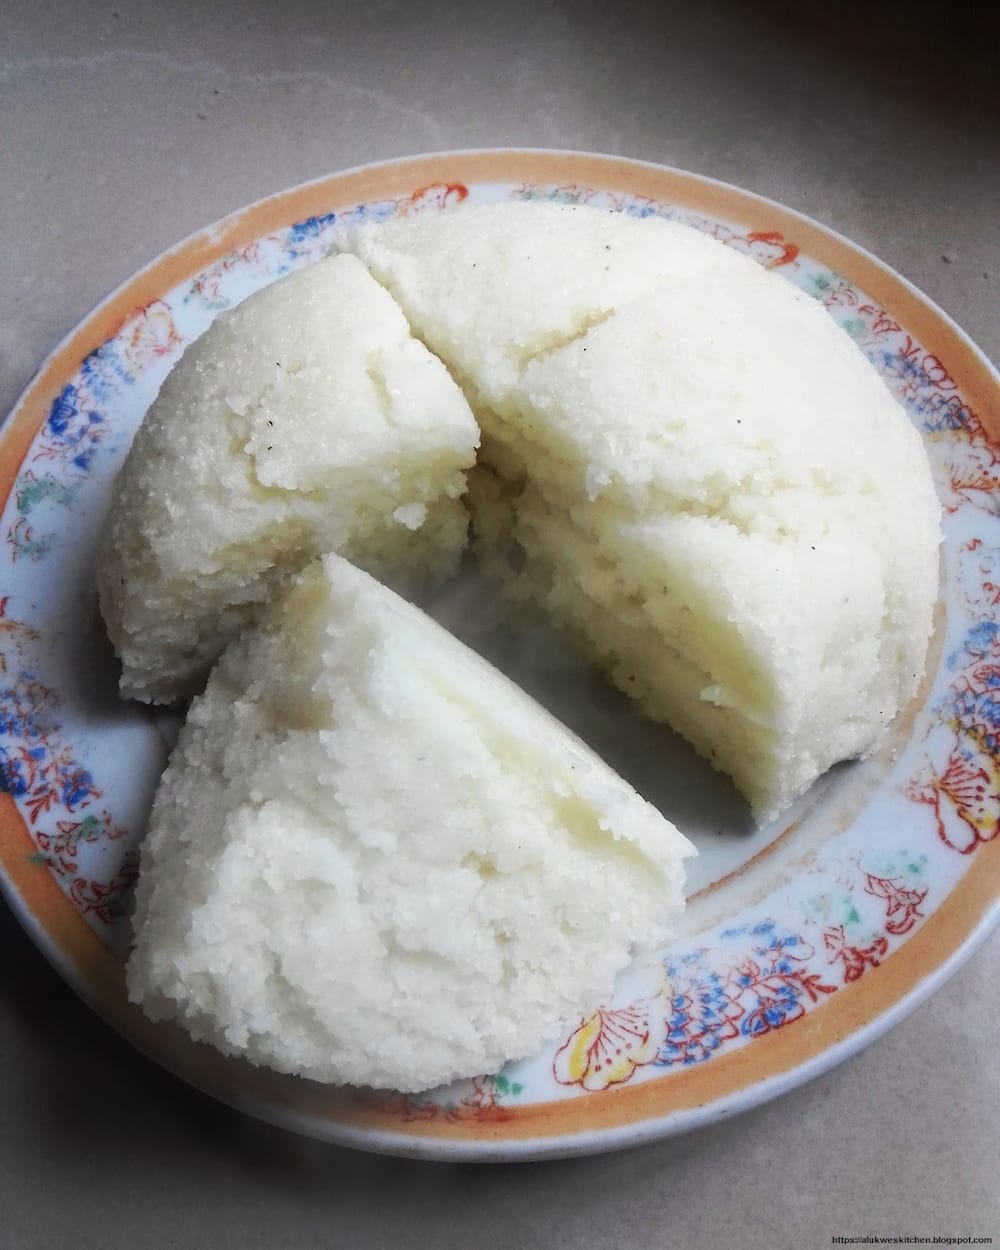 New invention of cooking Ugali without mwiko angers Luhyas